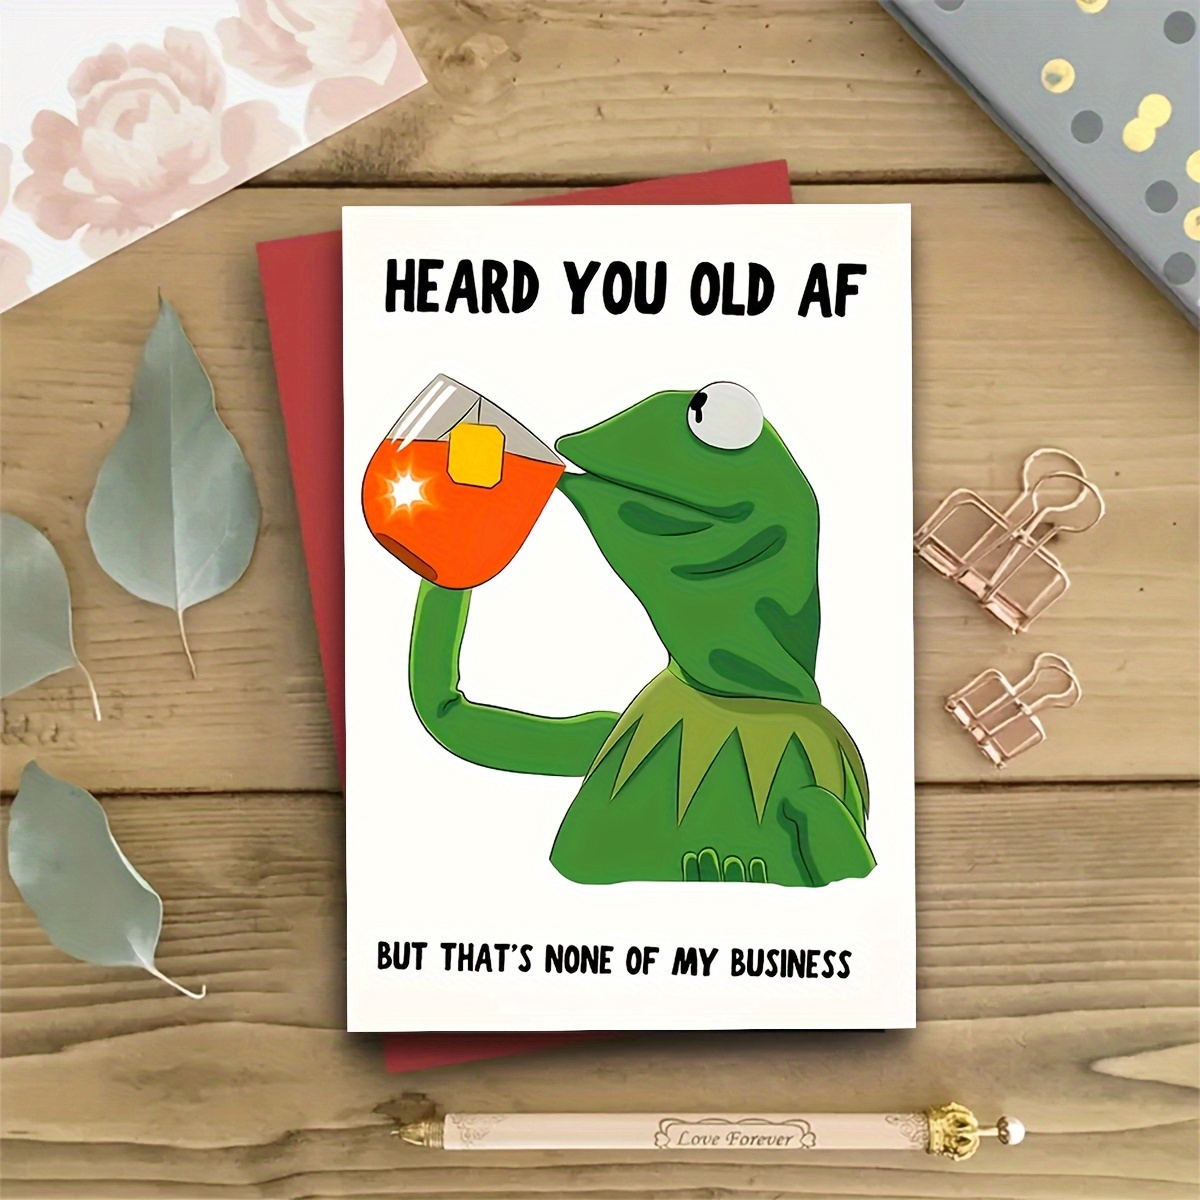 

1pc, Sleazy Greetings Funny Meme Birthday Cards For Him Or Her, 30th 40th 50th Birthday Cards, Old Af Cards, Small Business Supplies, Thank You Cards, Birthday Gifts, Cards, Unusual Items, Gift Cards